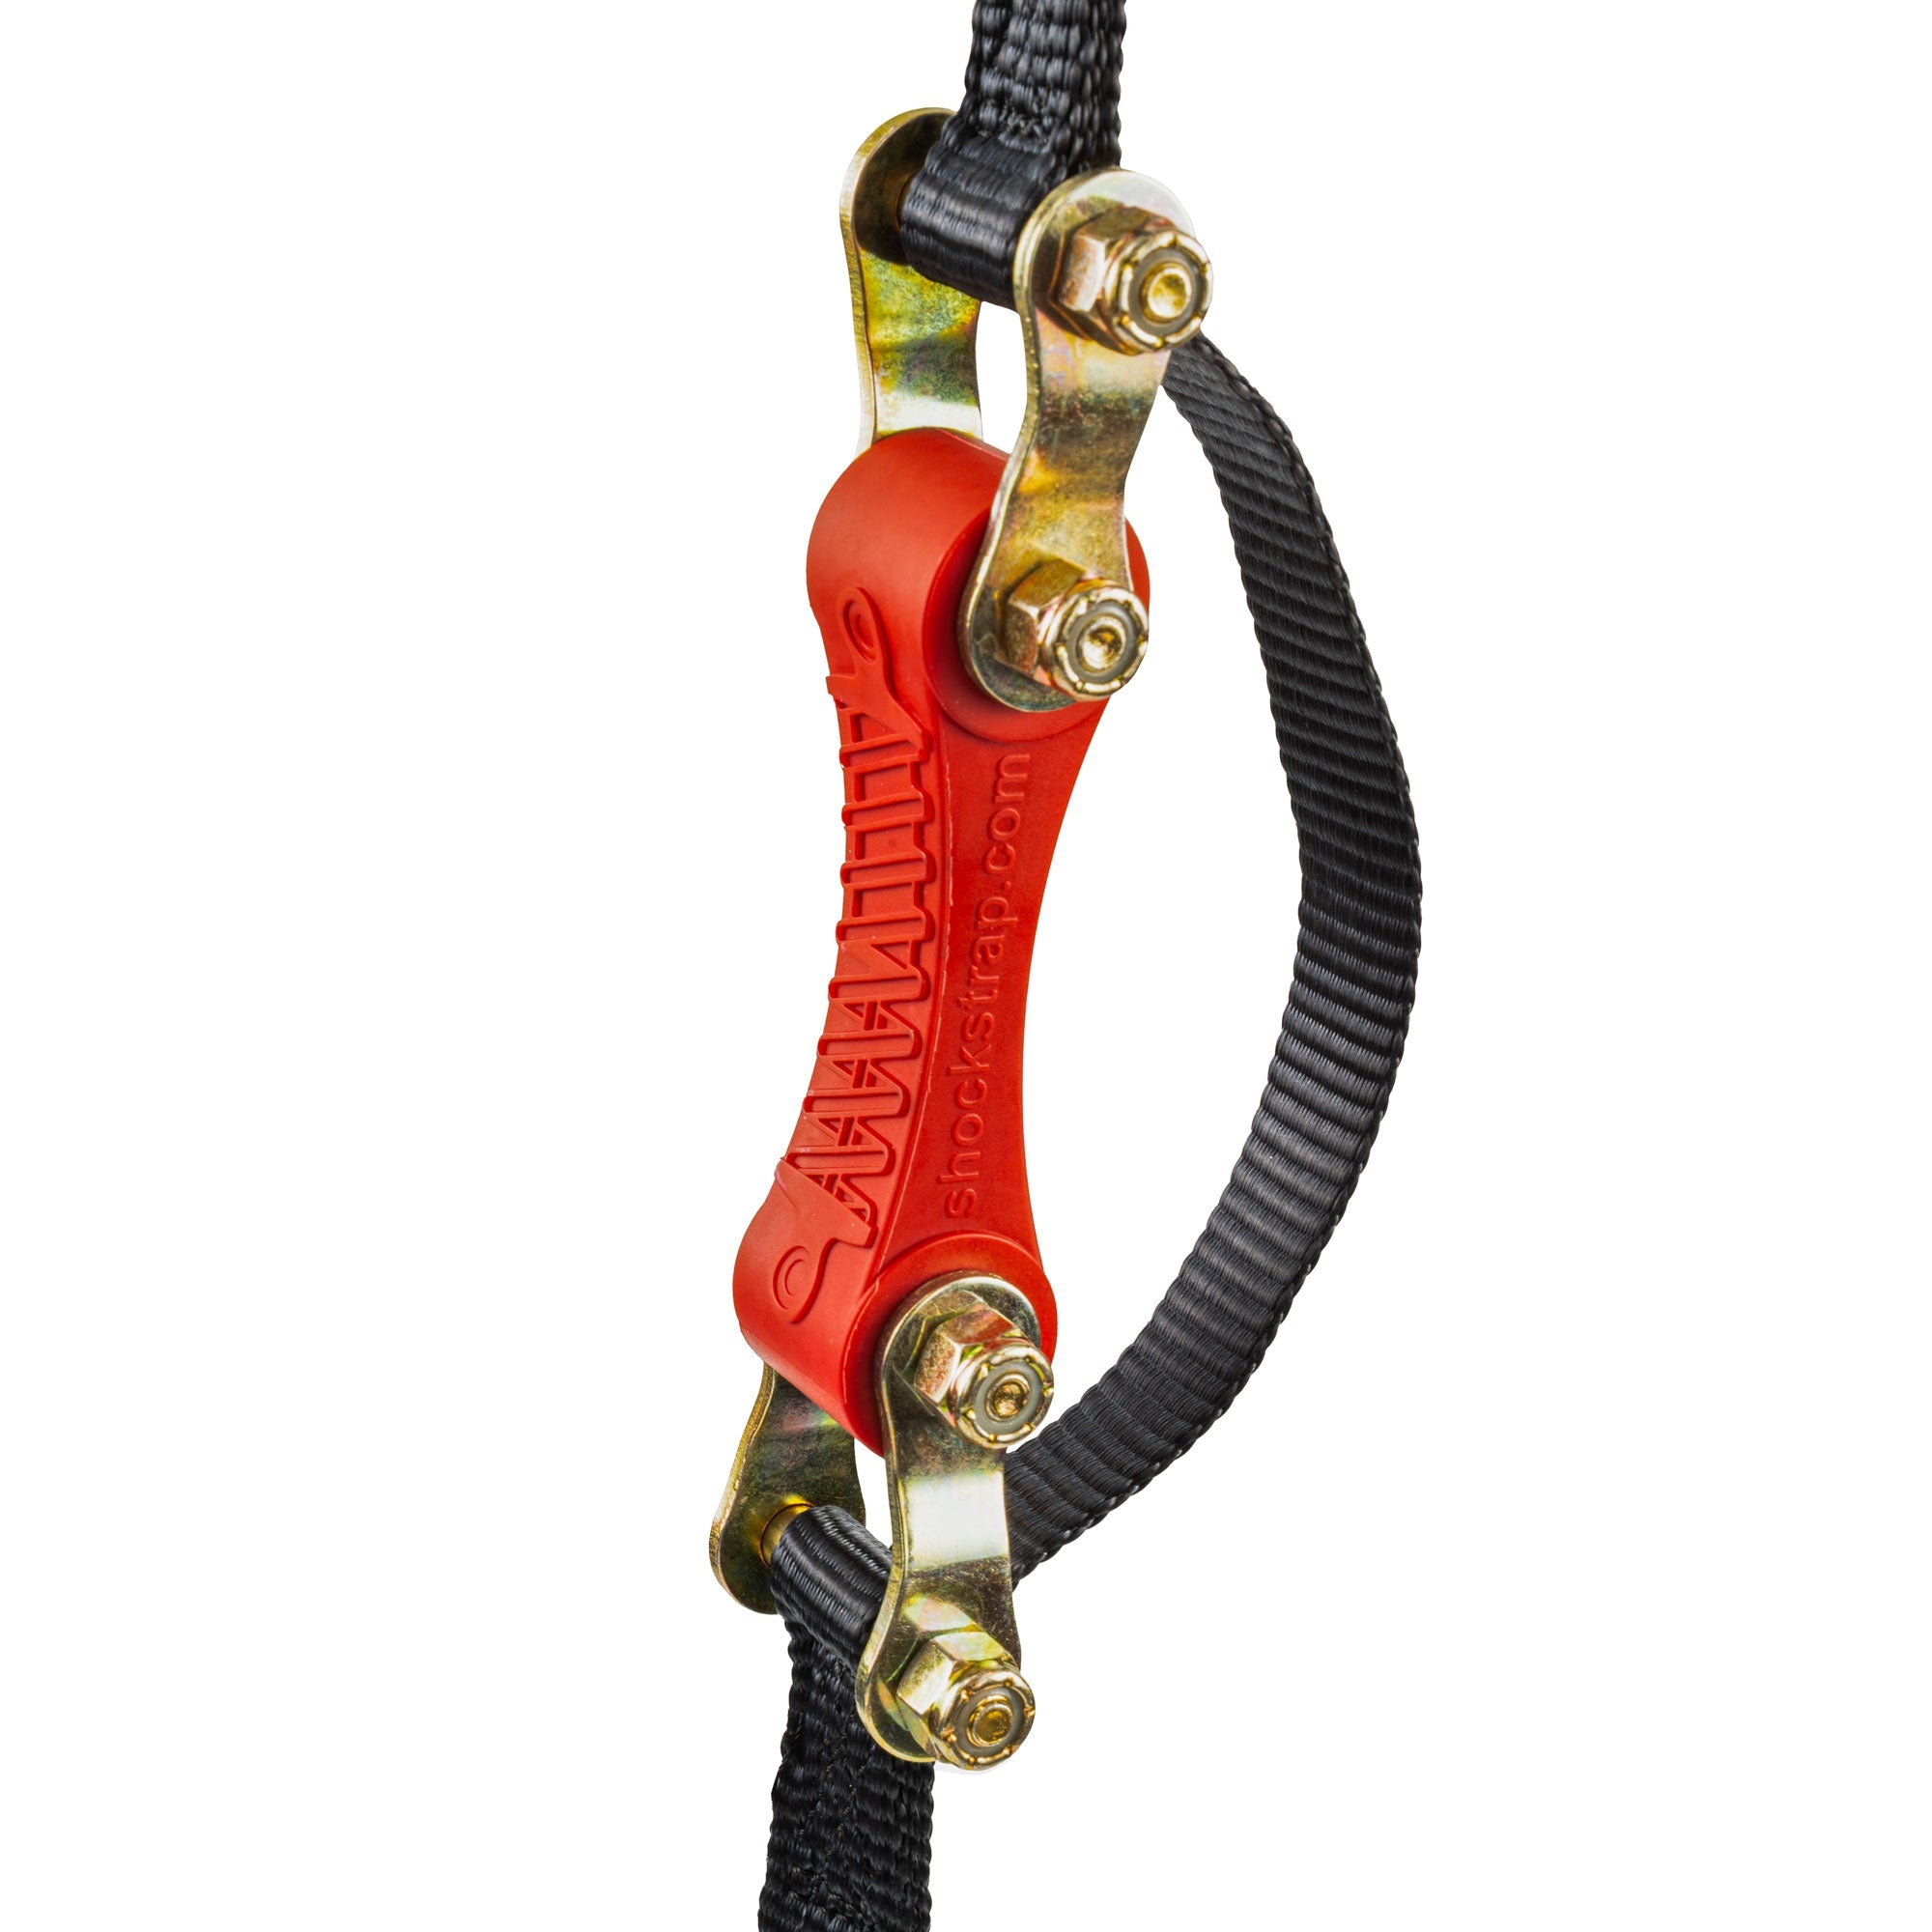 Outbound Multi-Purpose Adjustable Buckle Webbing Straps For